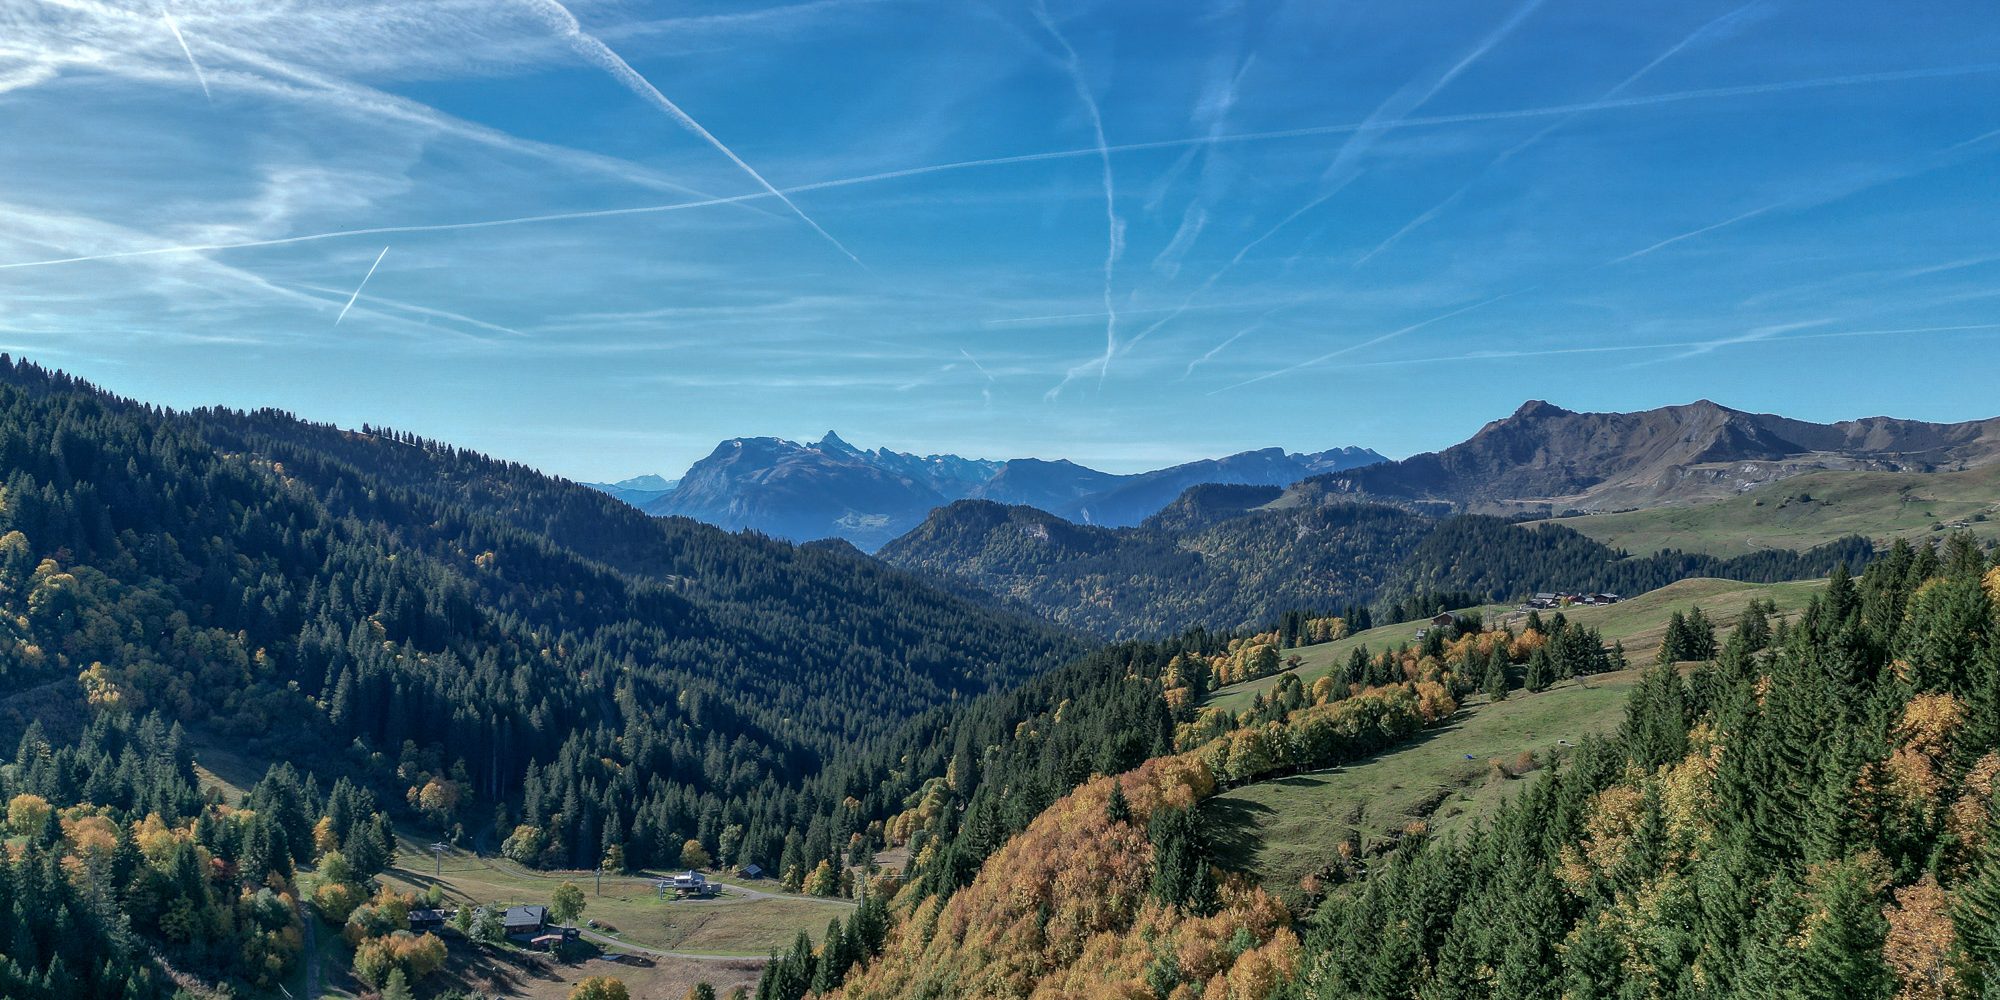 View from Praz de Lys with mountains in the distance.jpg